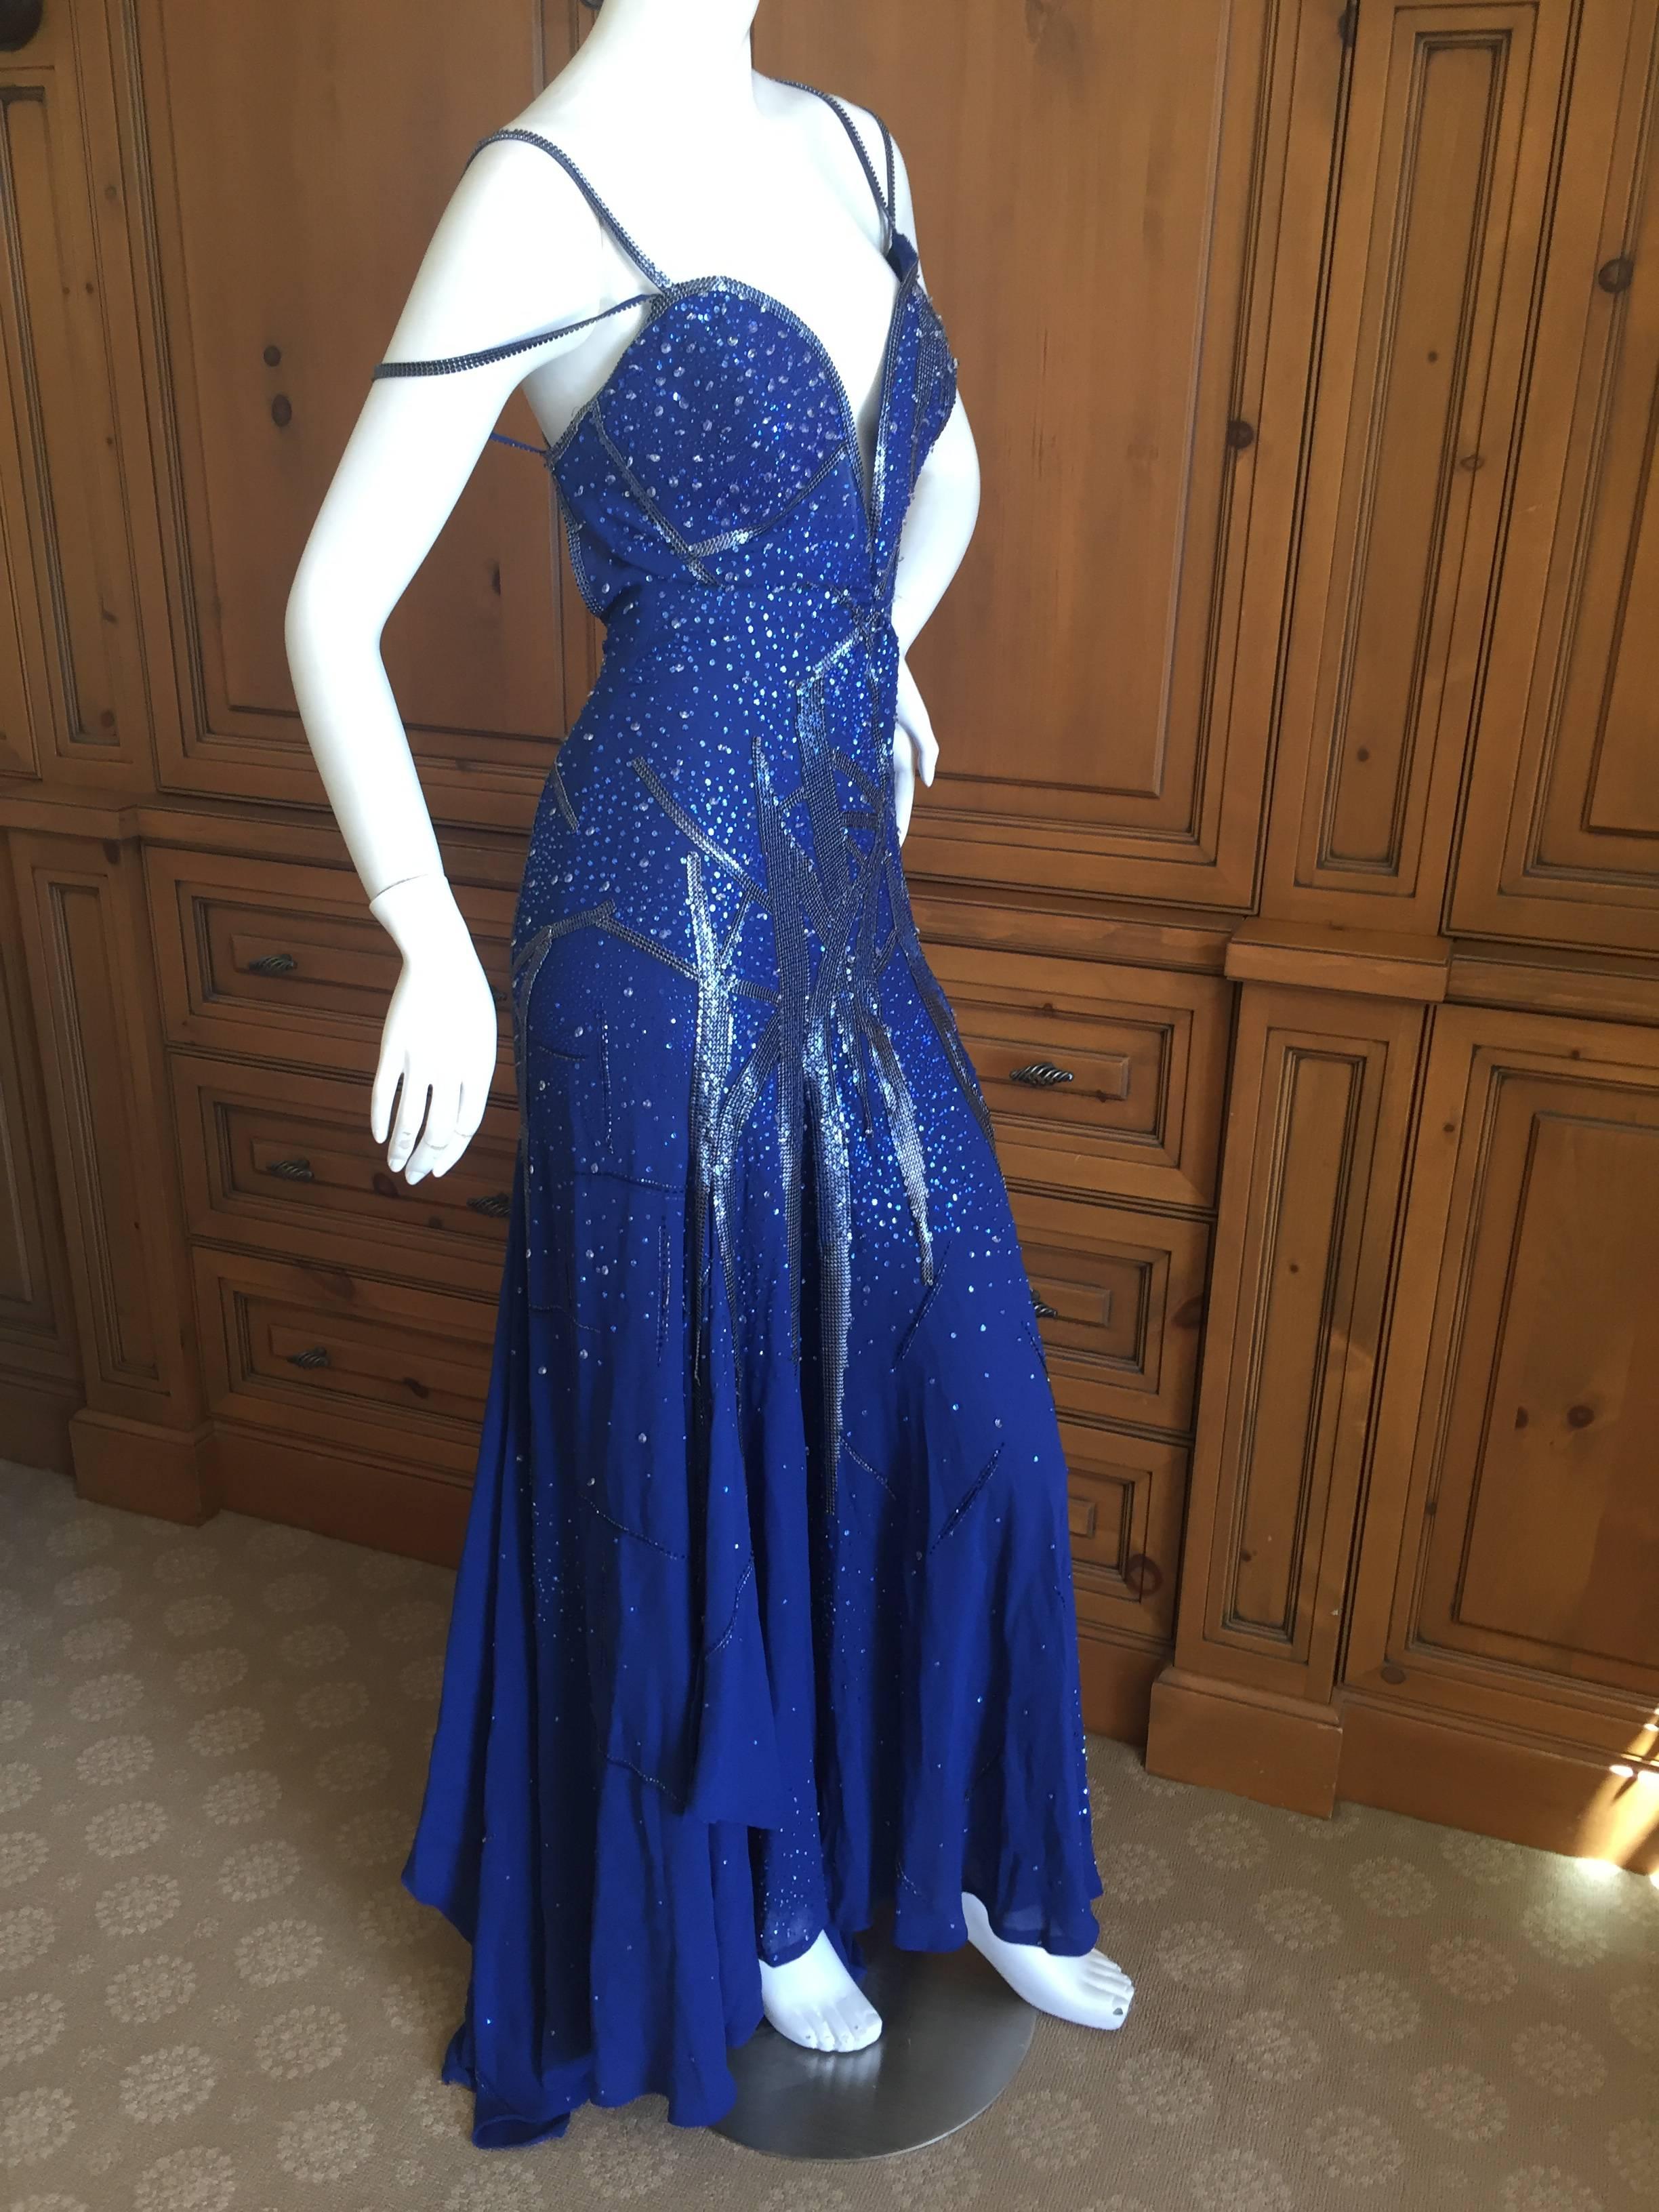 Women's Atelier Versace Gianni Era Blue Evening Dress with Metal Mesh and Crystal Detail For Sale